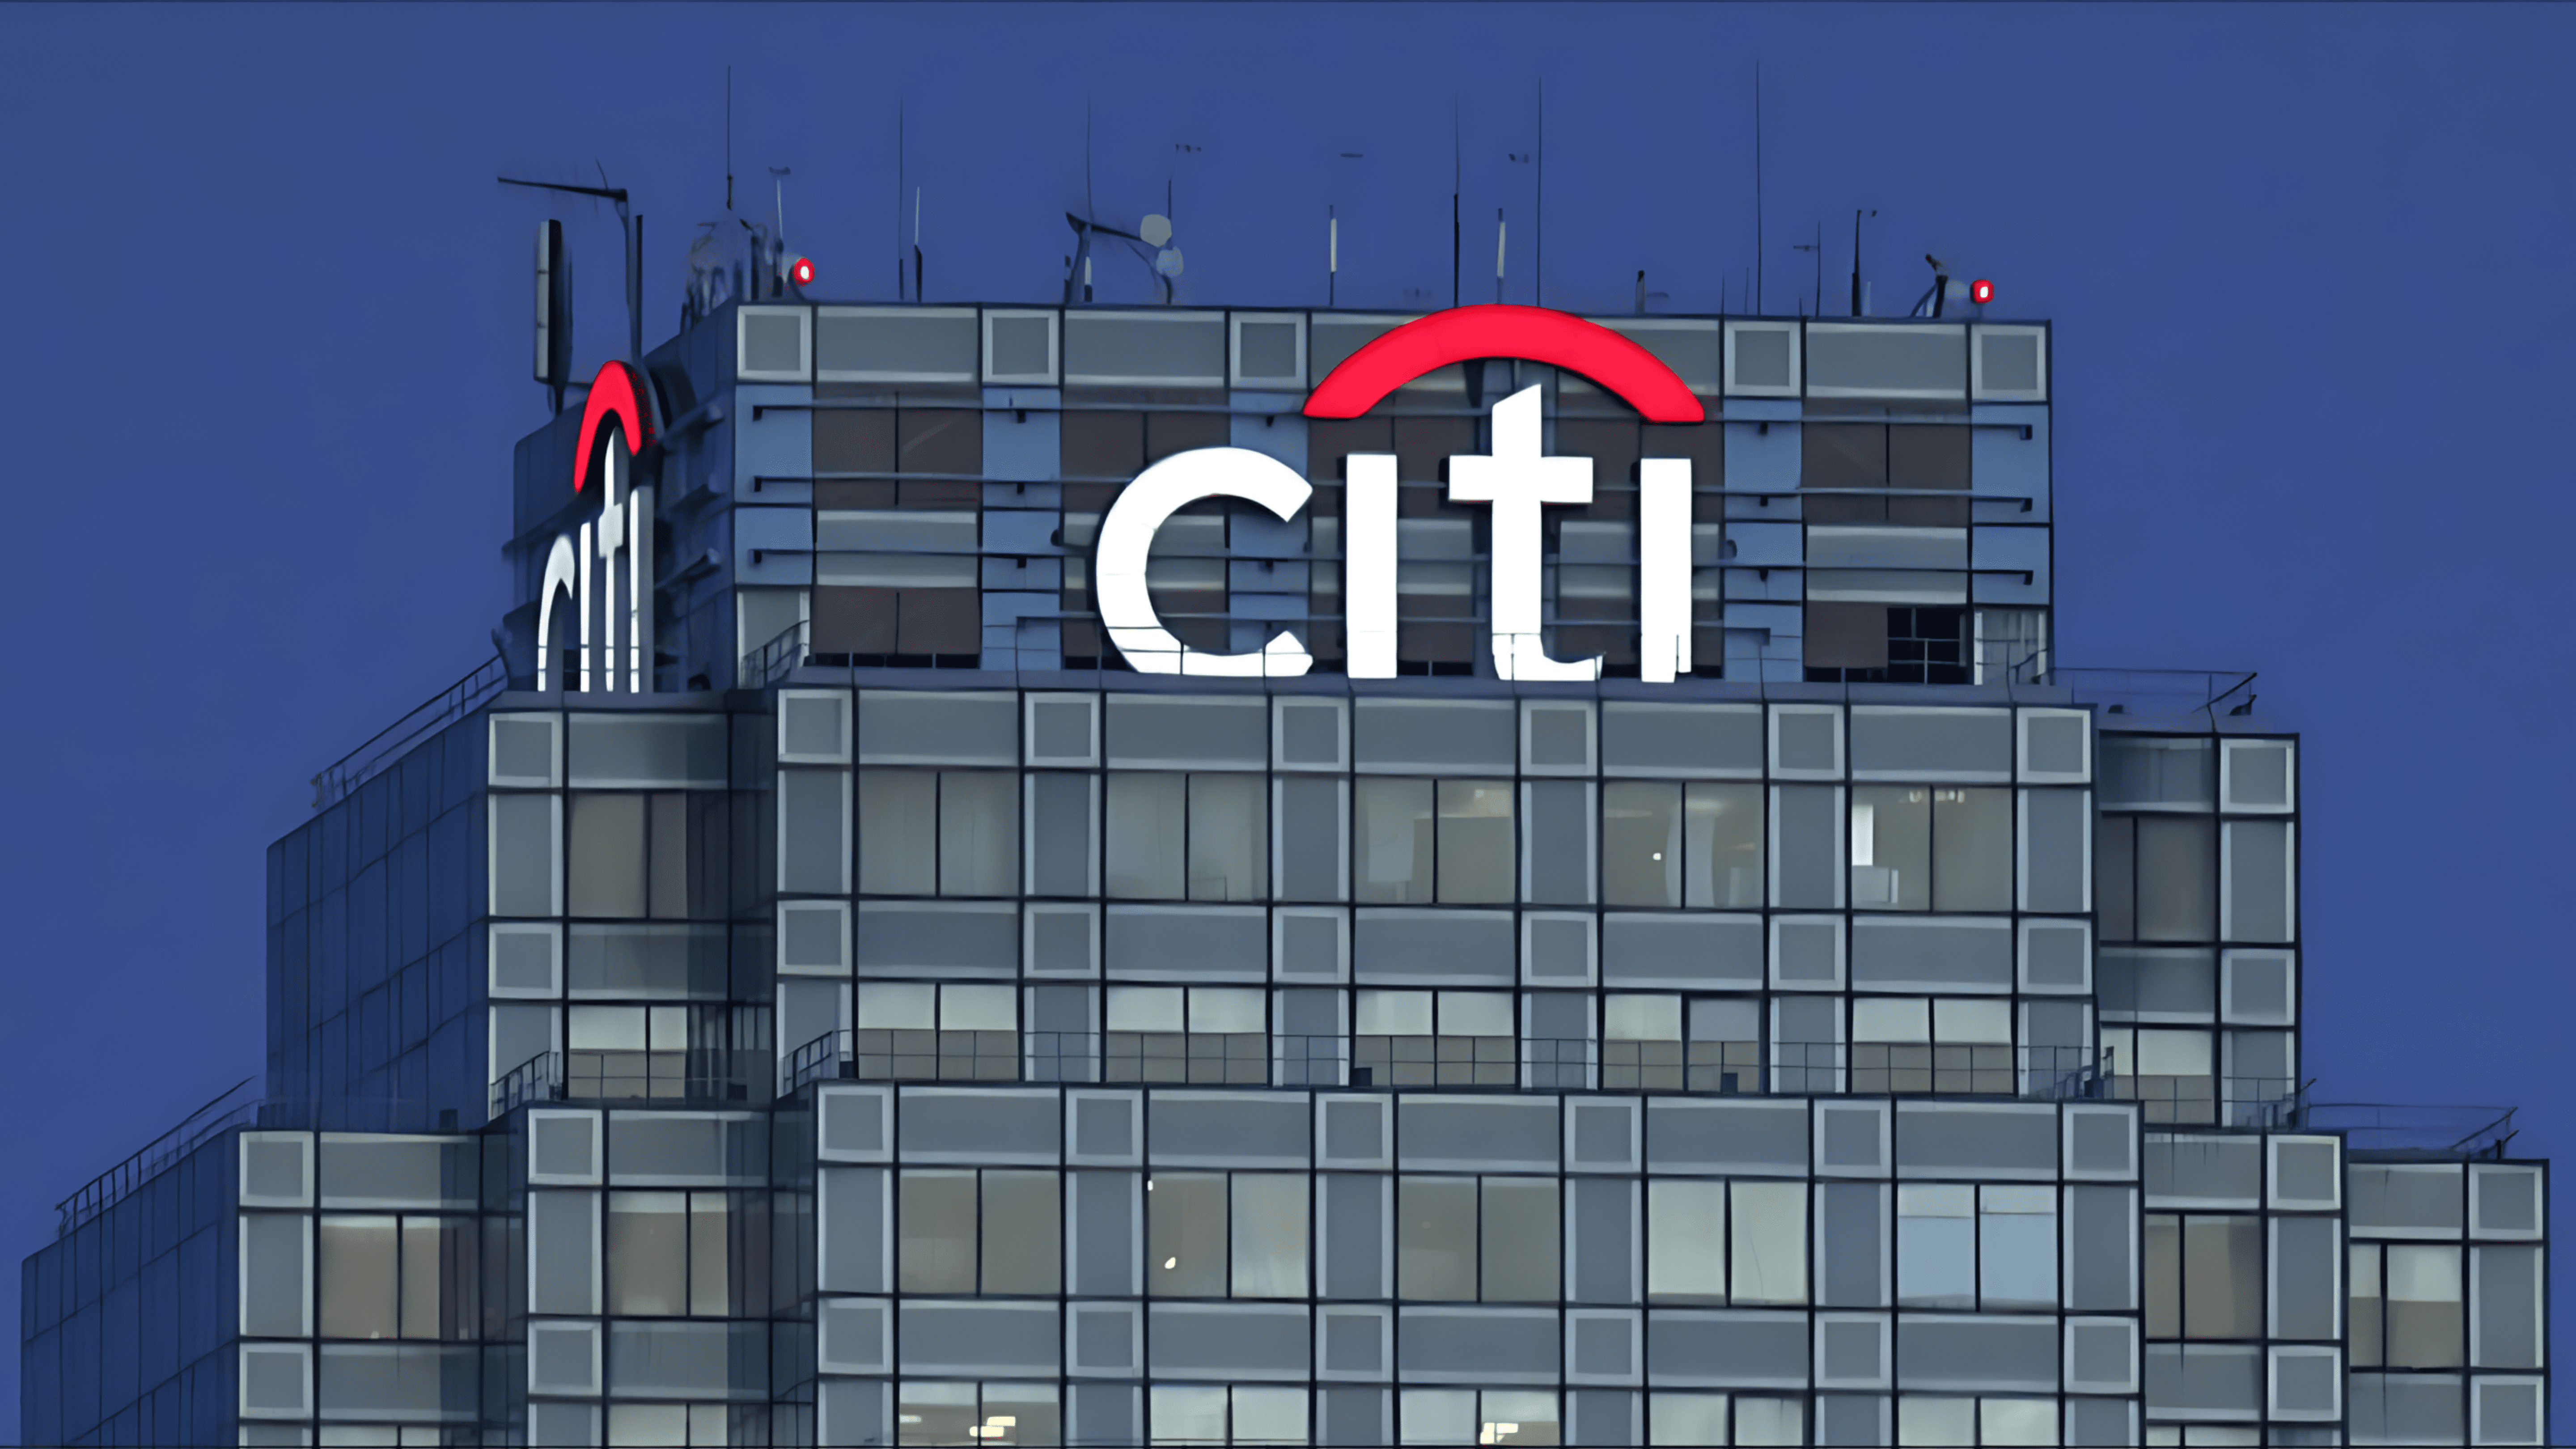 Citi achieves $441B of $1T sustainable finance 2030 goal with renewables a ‘major driver’